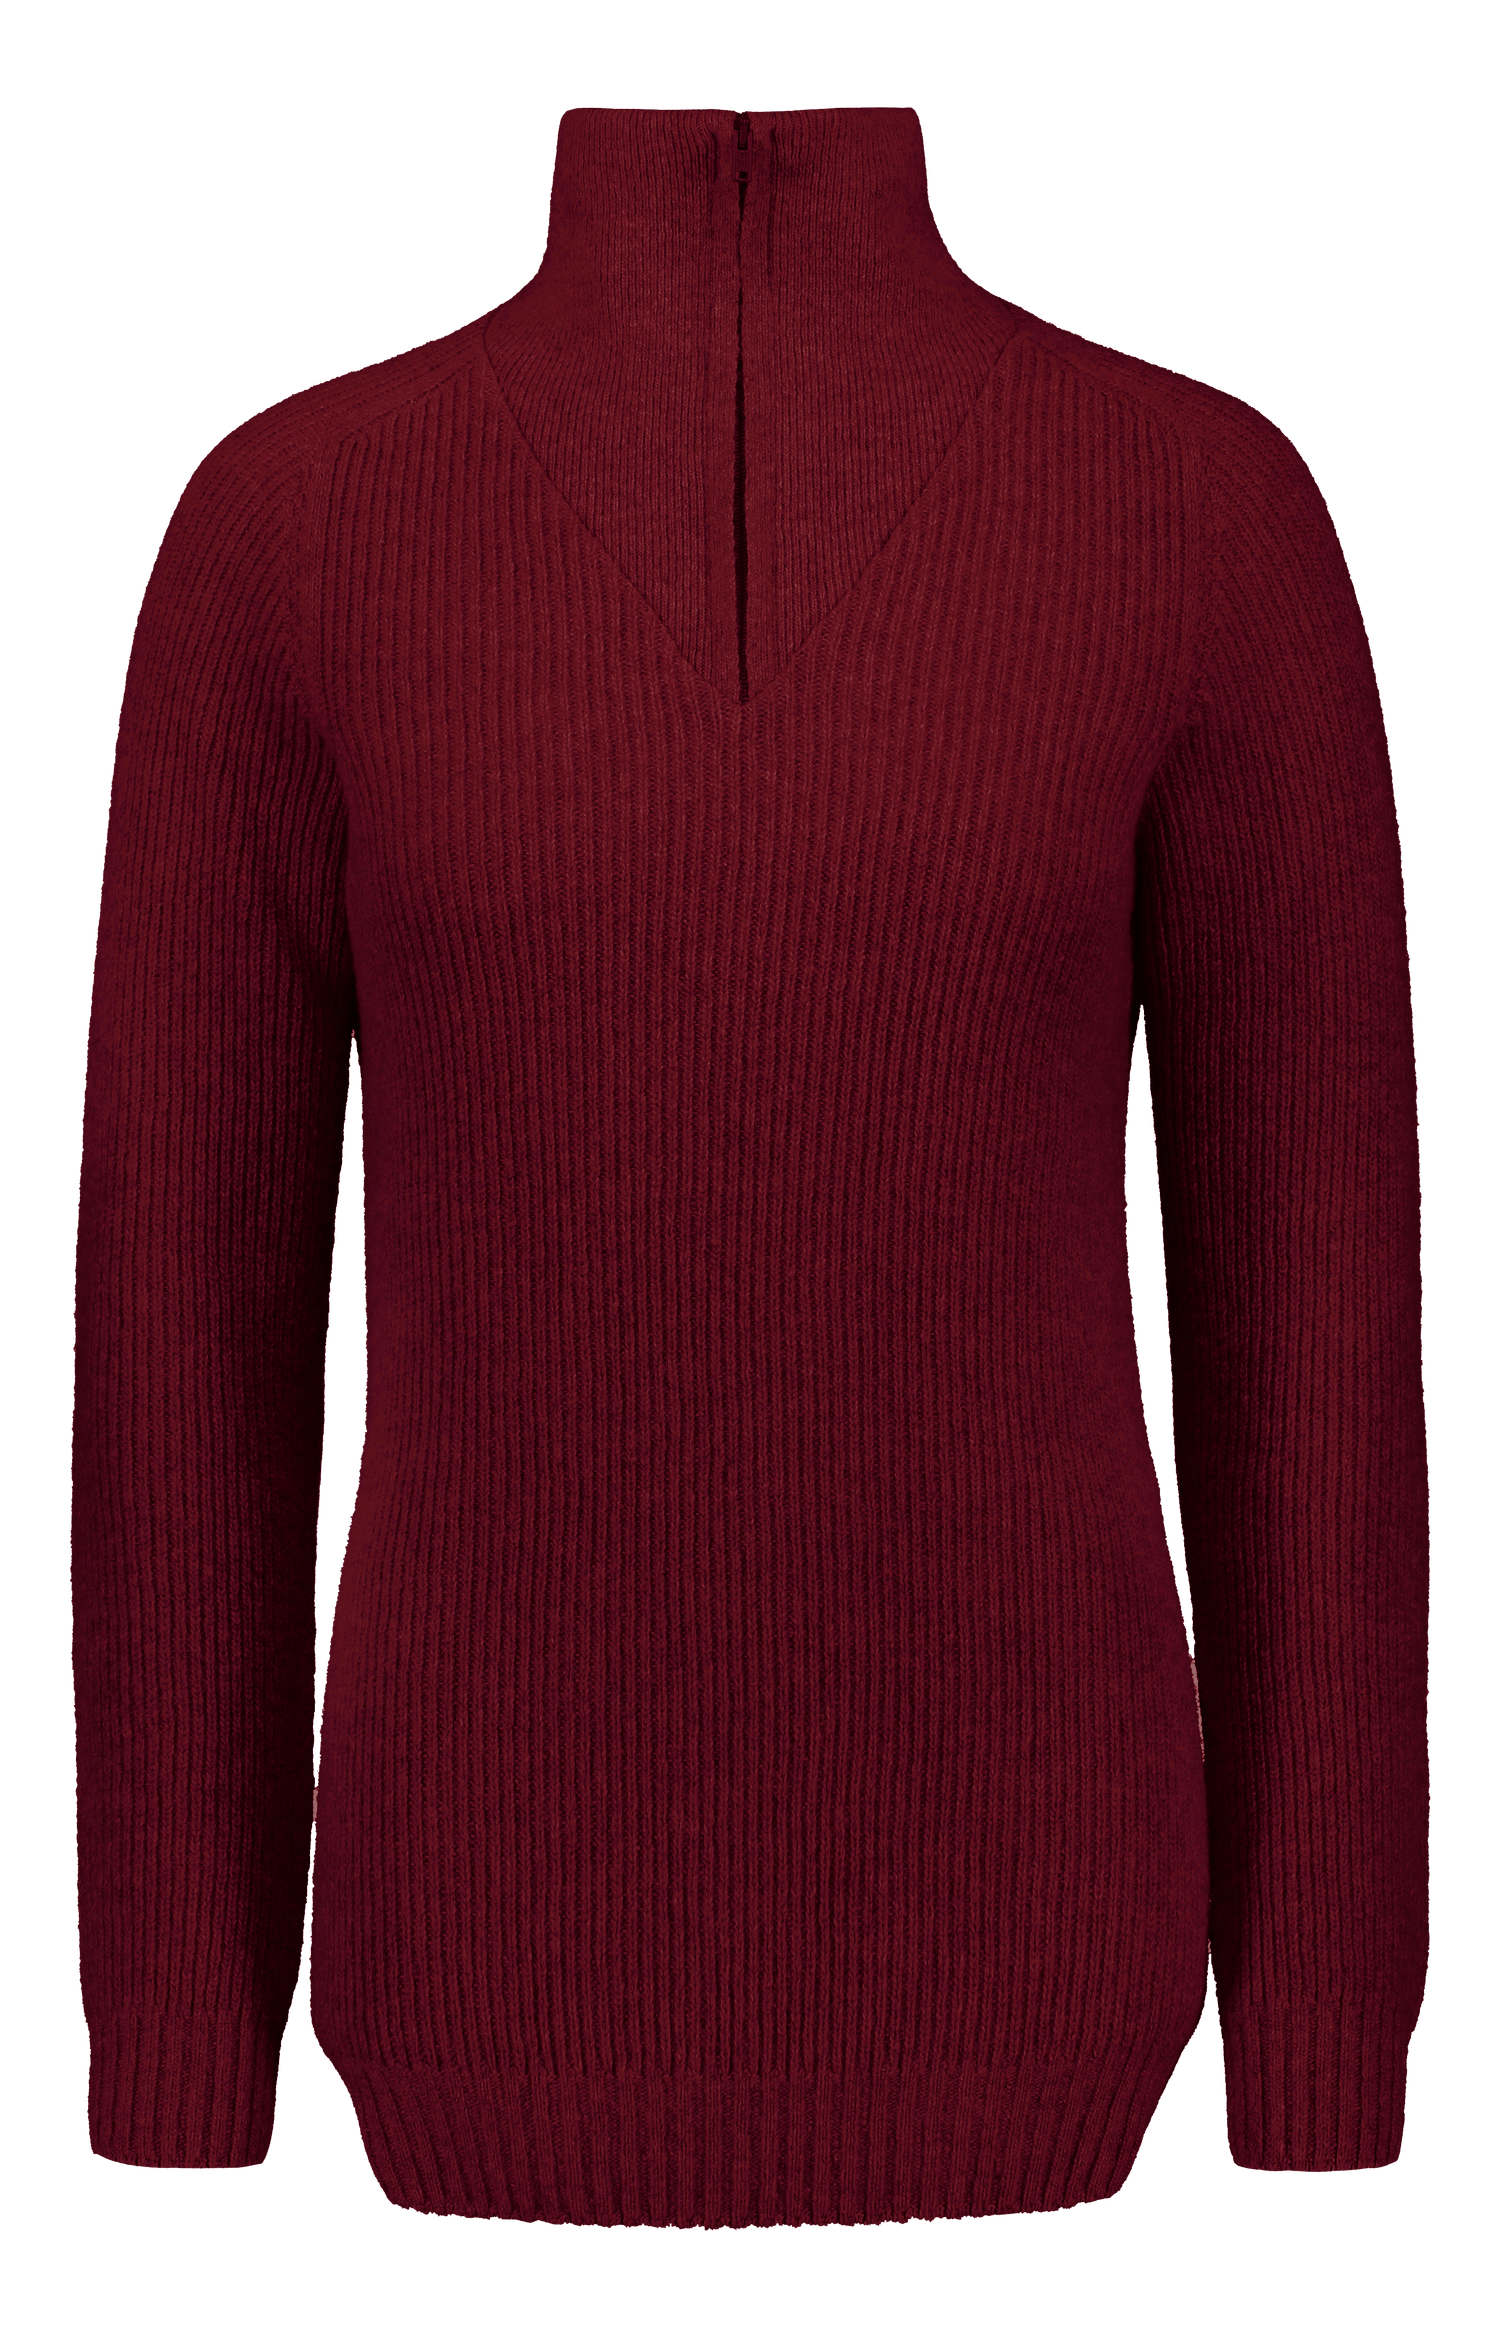 North Outdoor W's Metso Sweater - 100 % Merino Wool - Made in Finland Cranberry Shirt